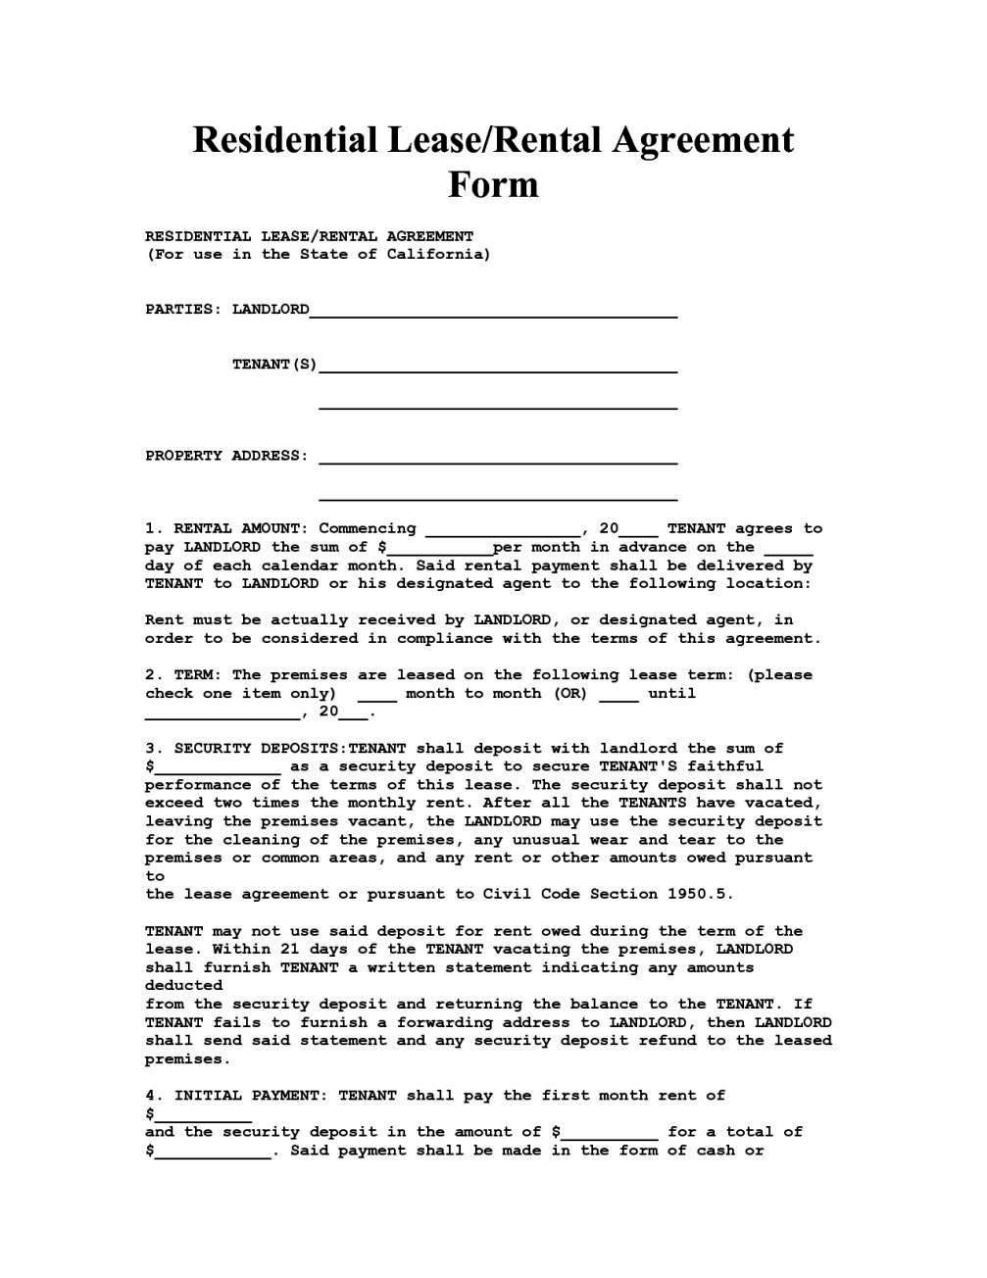 House Share Tenancy Agreement Template